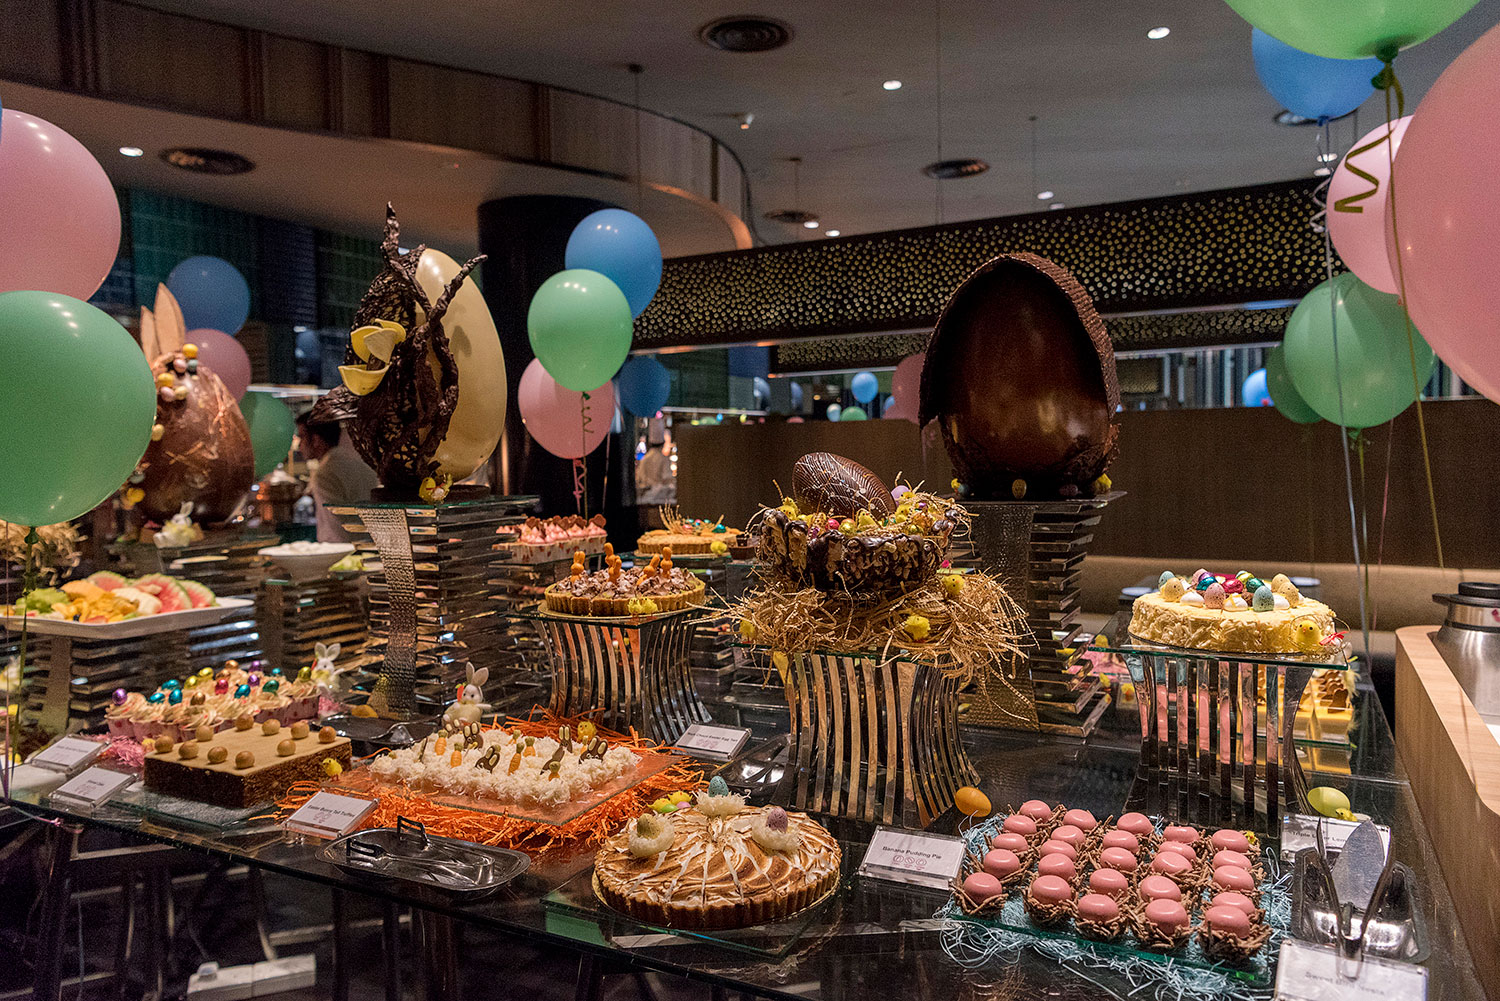 Azur Crowne Plaza Changi Airport 1 For 1 For Buffet Lunch And Dinner